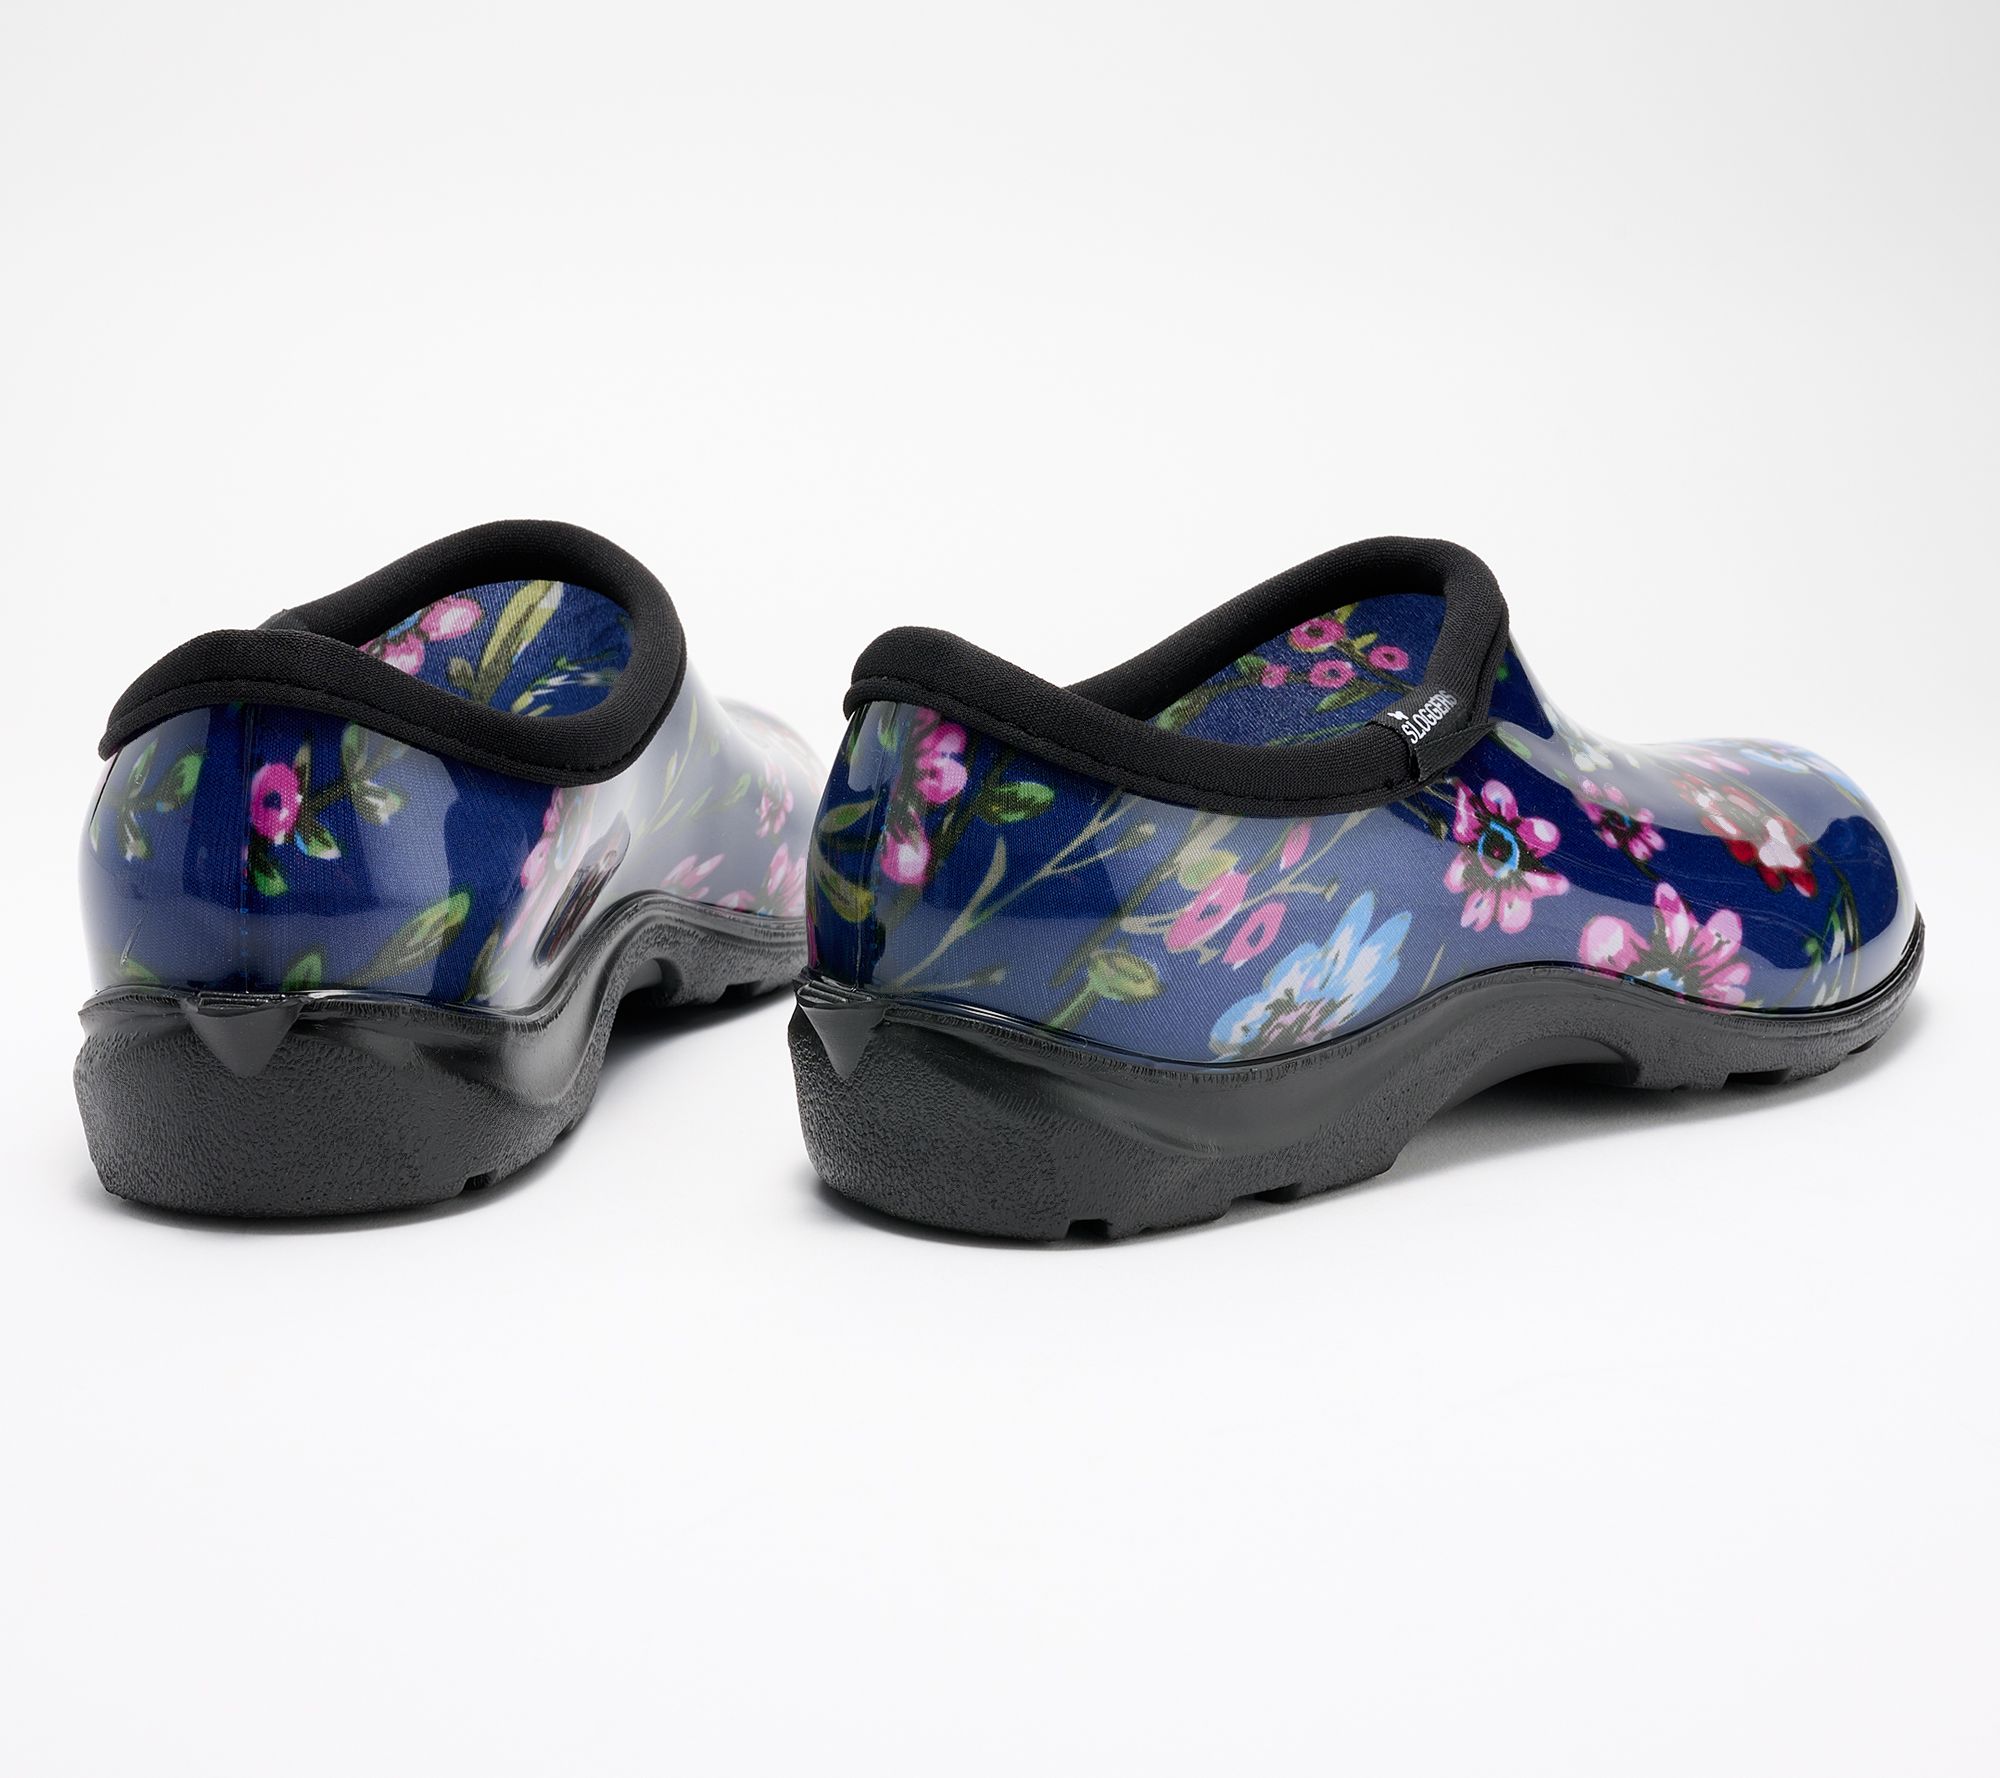 Sloggers Printed Floral Navy Base Waterproof Gardening Shoes - QVC.com